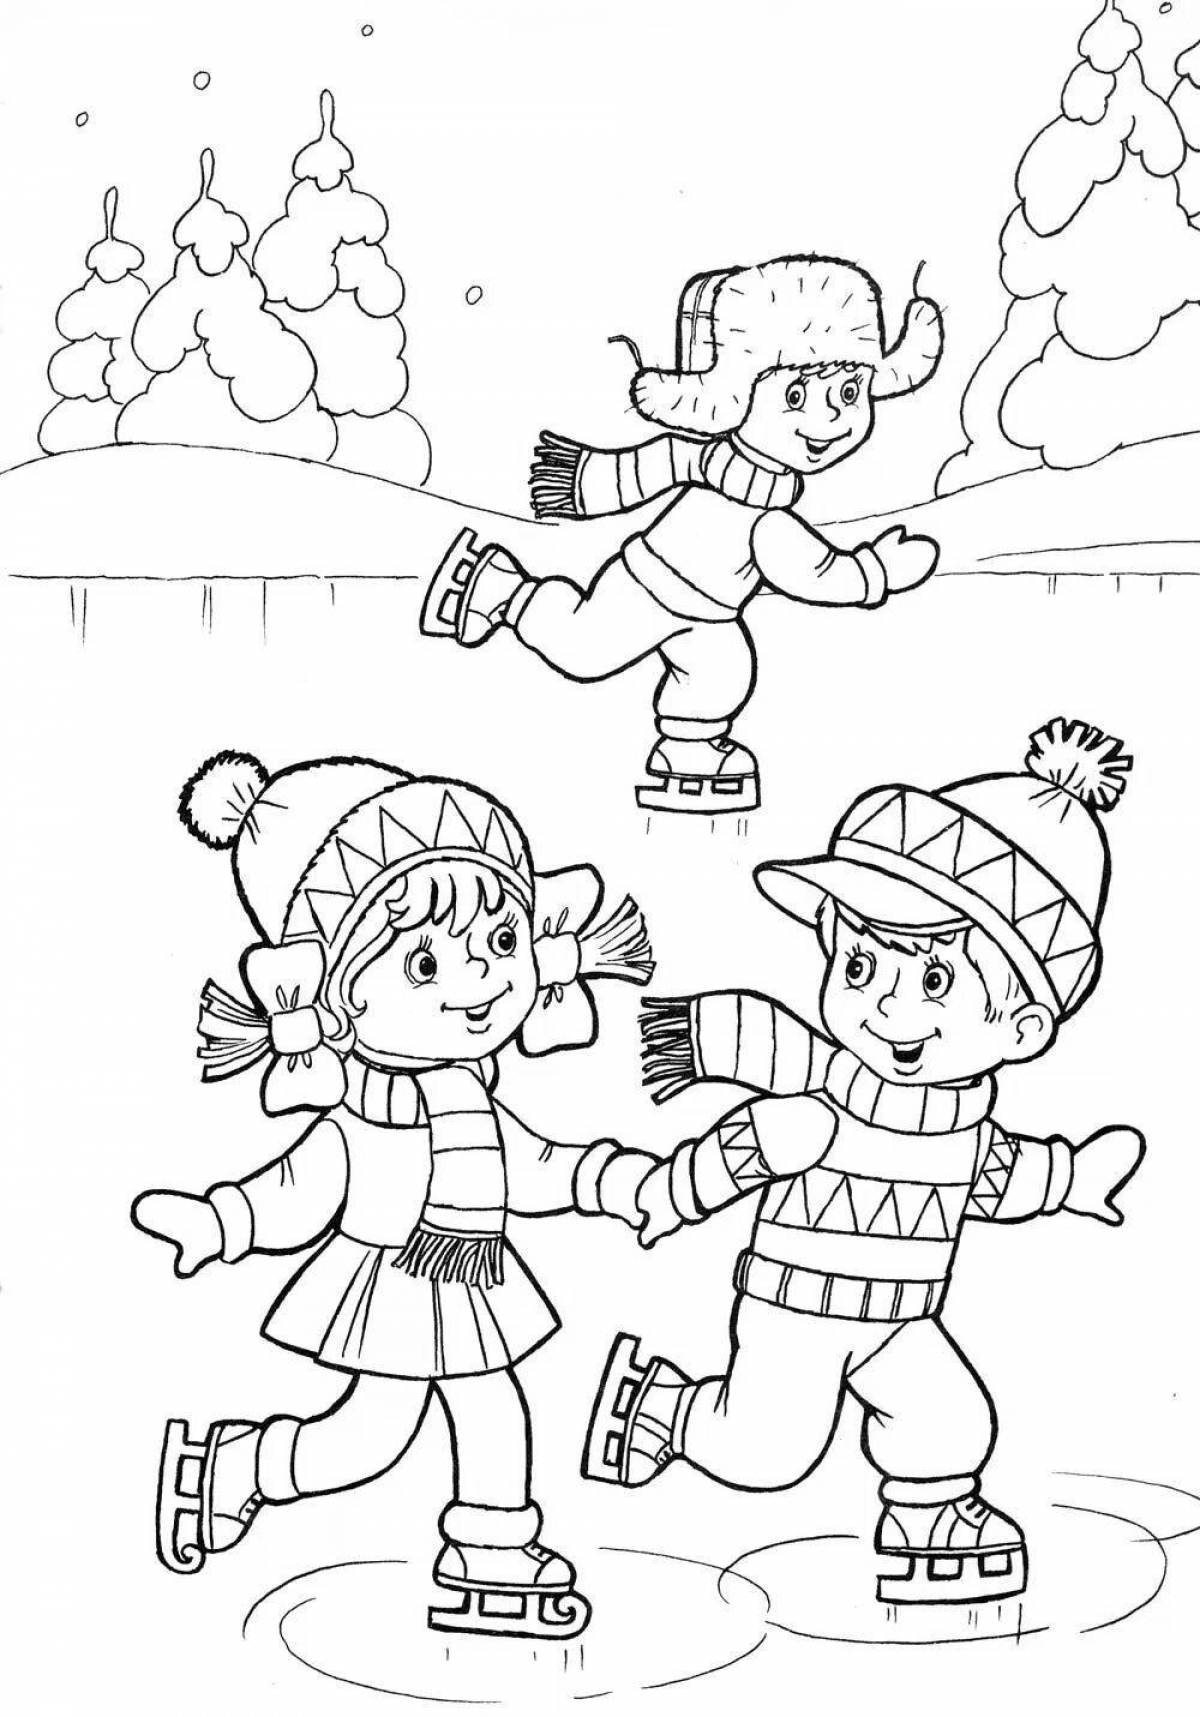 Live winter games coloring page